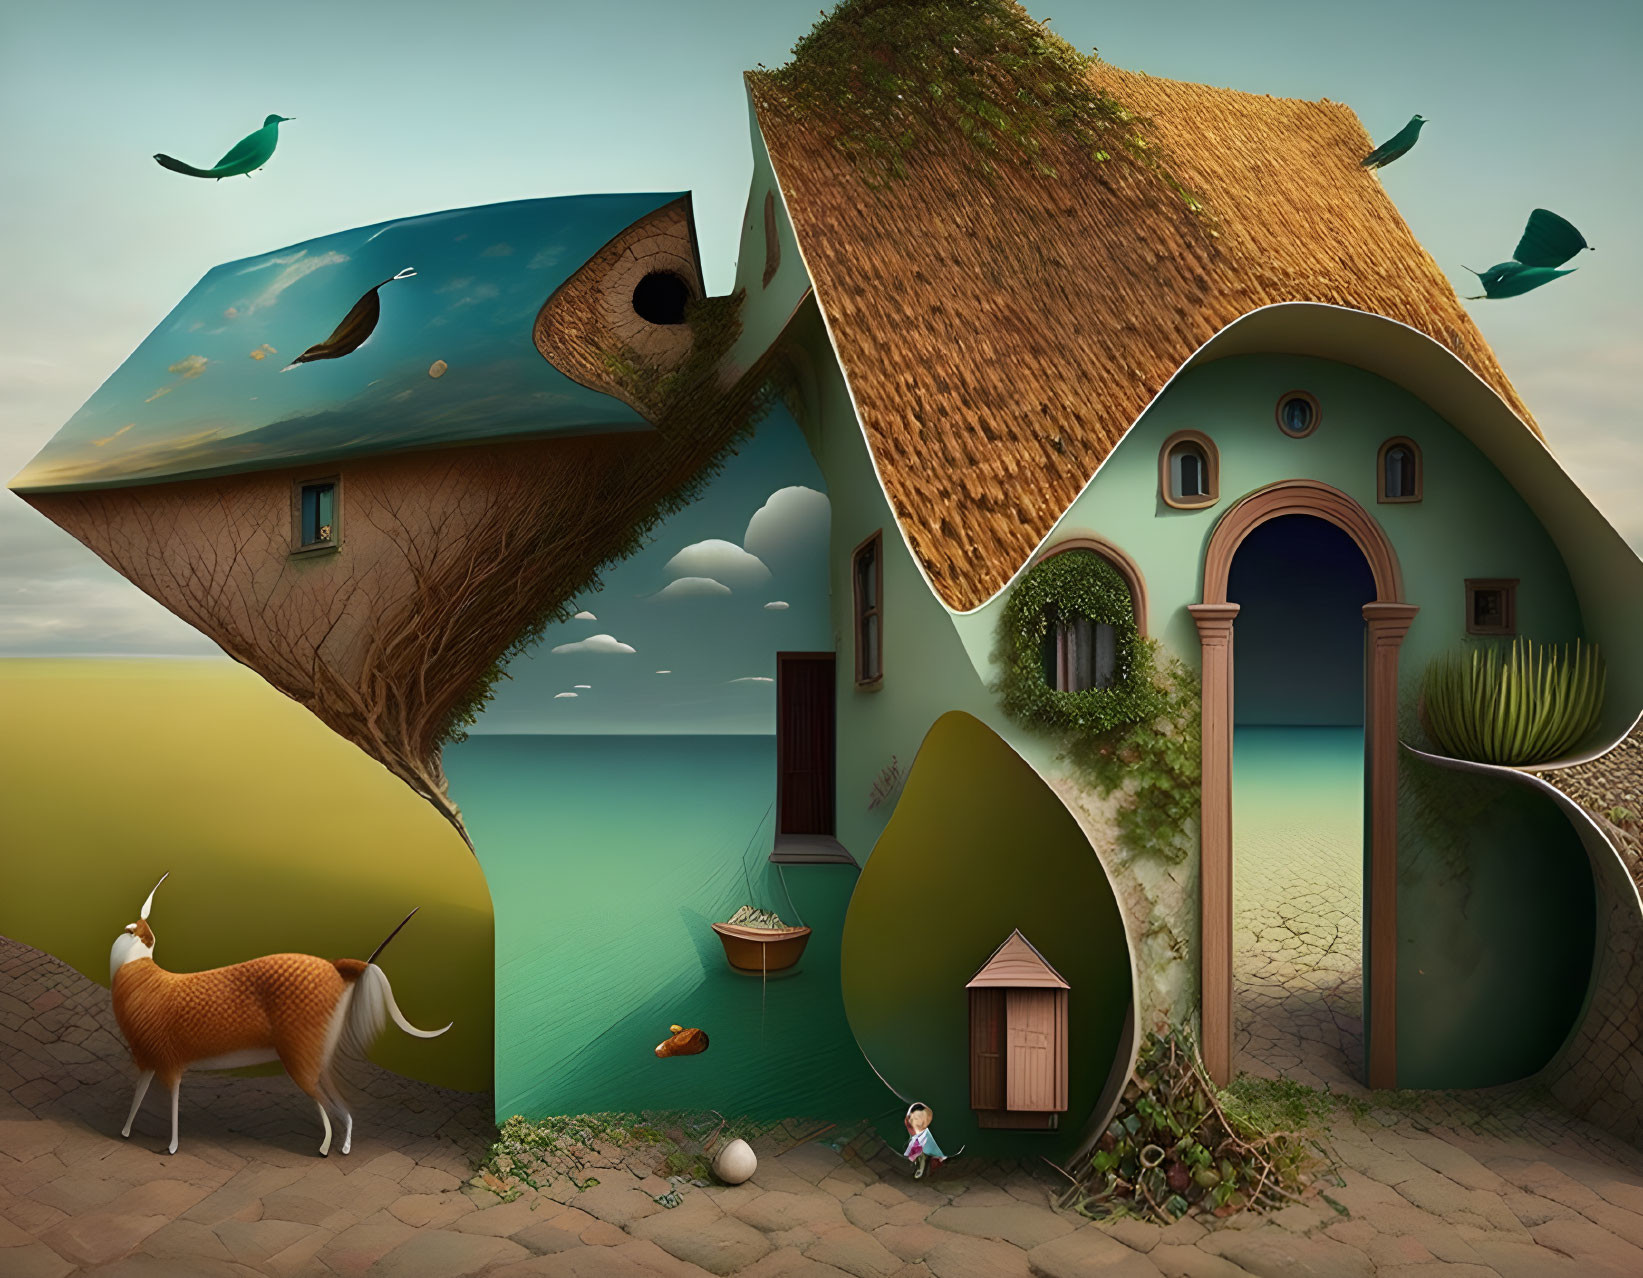 Split fantasy house with thatched roof, fox, child, floating books, and birds in surreal artwork